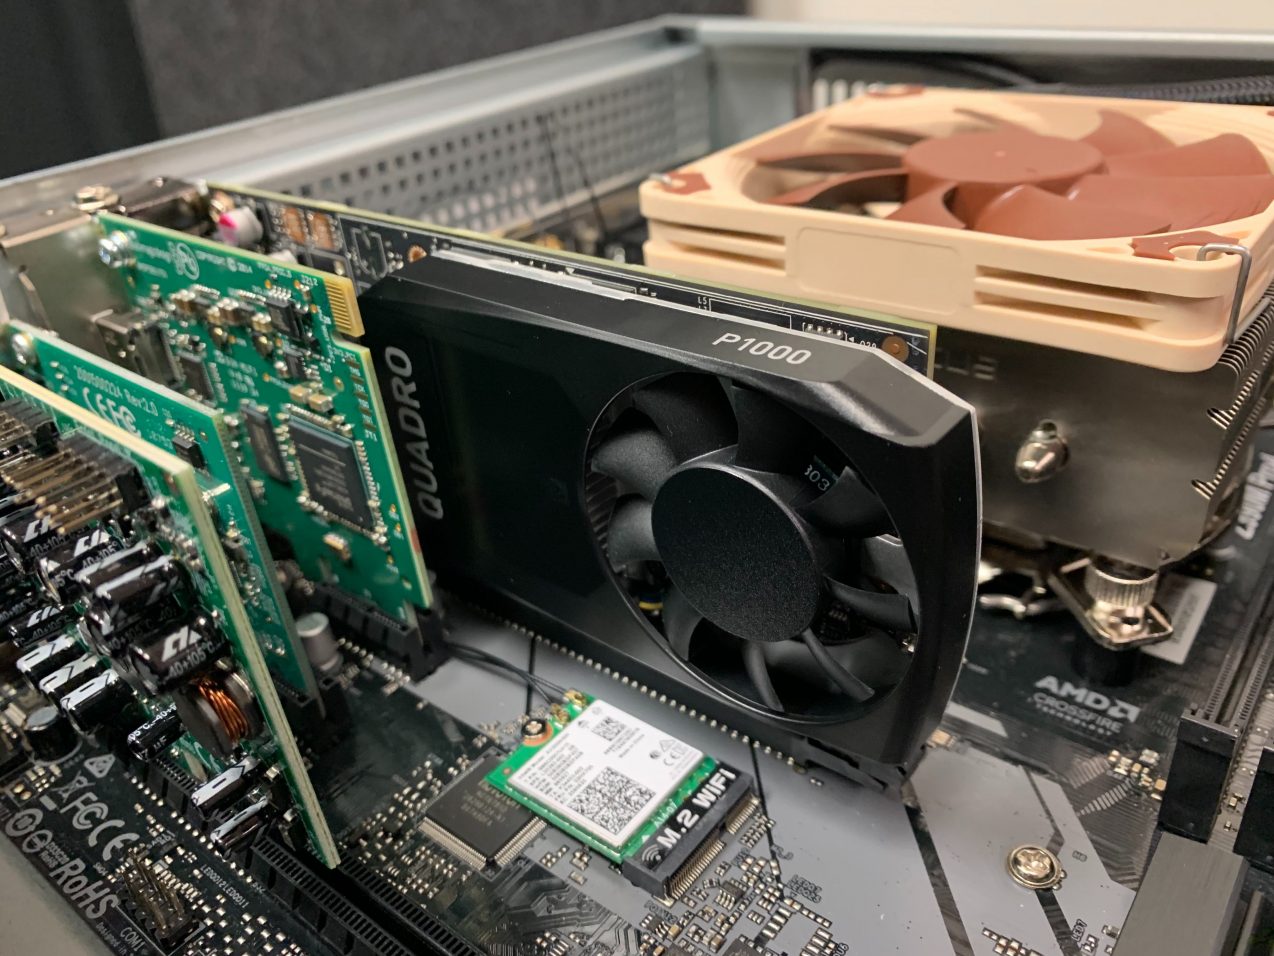 Quadro P1000 graphics card installed inside a rackmount PC